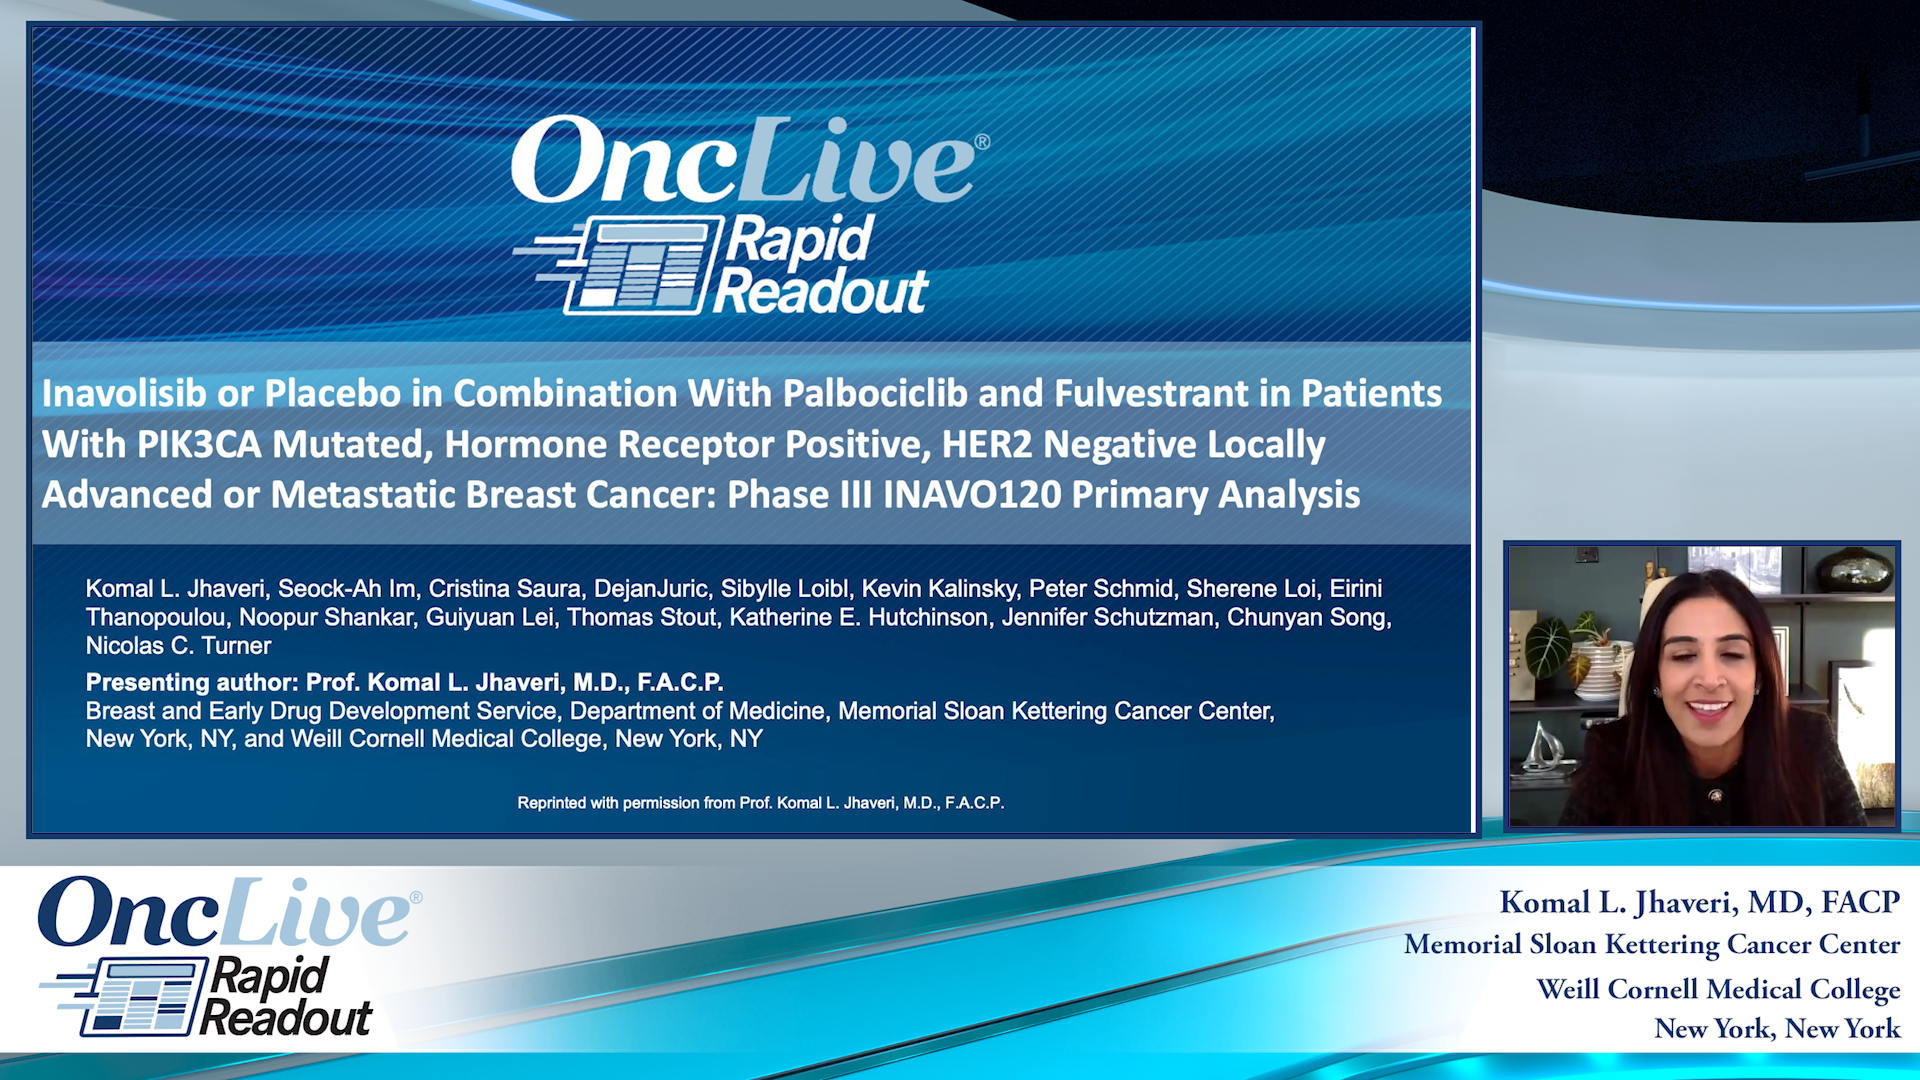 Inavolisib or Placebo in Combination With Palbociclib and Fulvestrant in Patients With PIK3CA Mutated, Hormone Receptor Positive, HER2 Negative Locally Advanced or Metastatic Breast Cancer: Phase III INAVO120 Primary Analysis